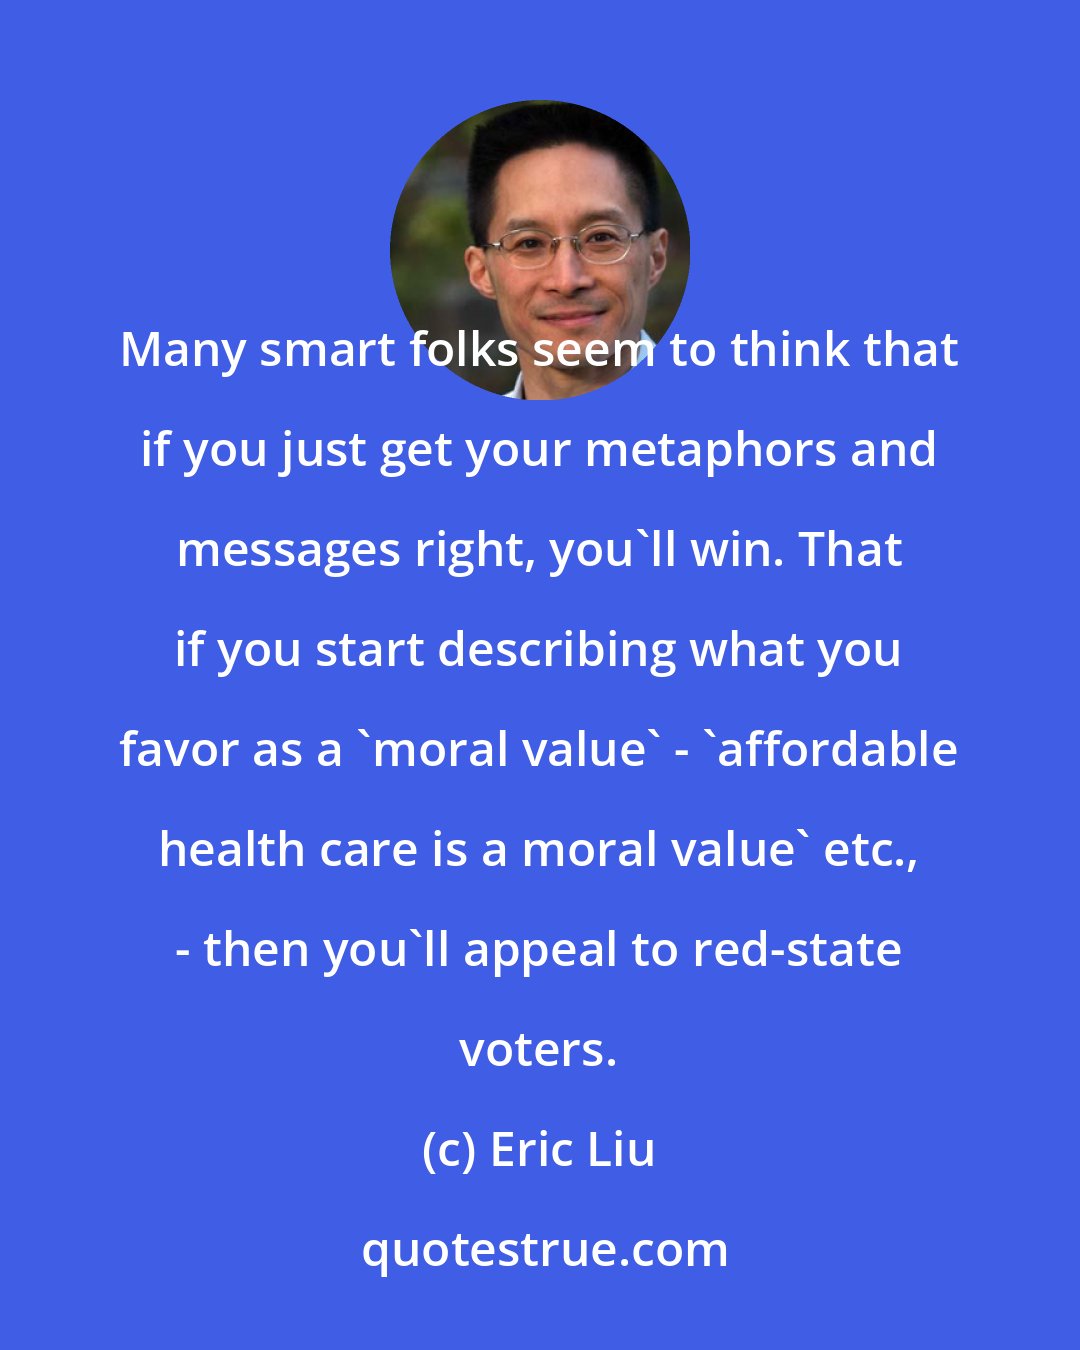 Eric Liu: Many smart folks seem to think that if you just get your metaphors and messages right, you'll win. That if you start describing what you favor as a 'moral value' - 'affordable health care is a moral value' etc., - then you'll appeal to red-state voters.